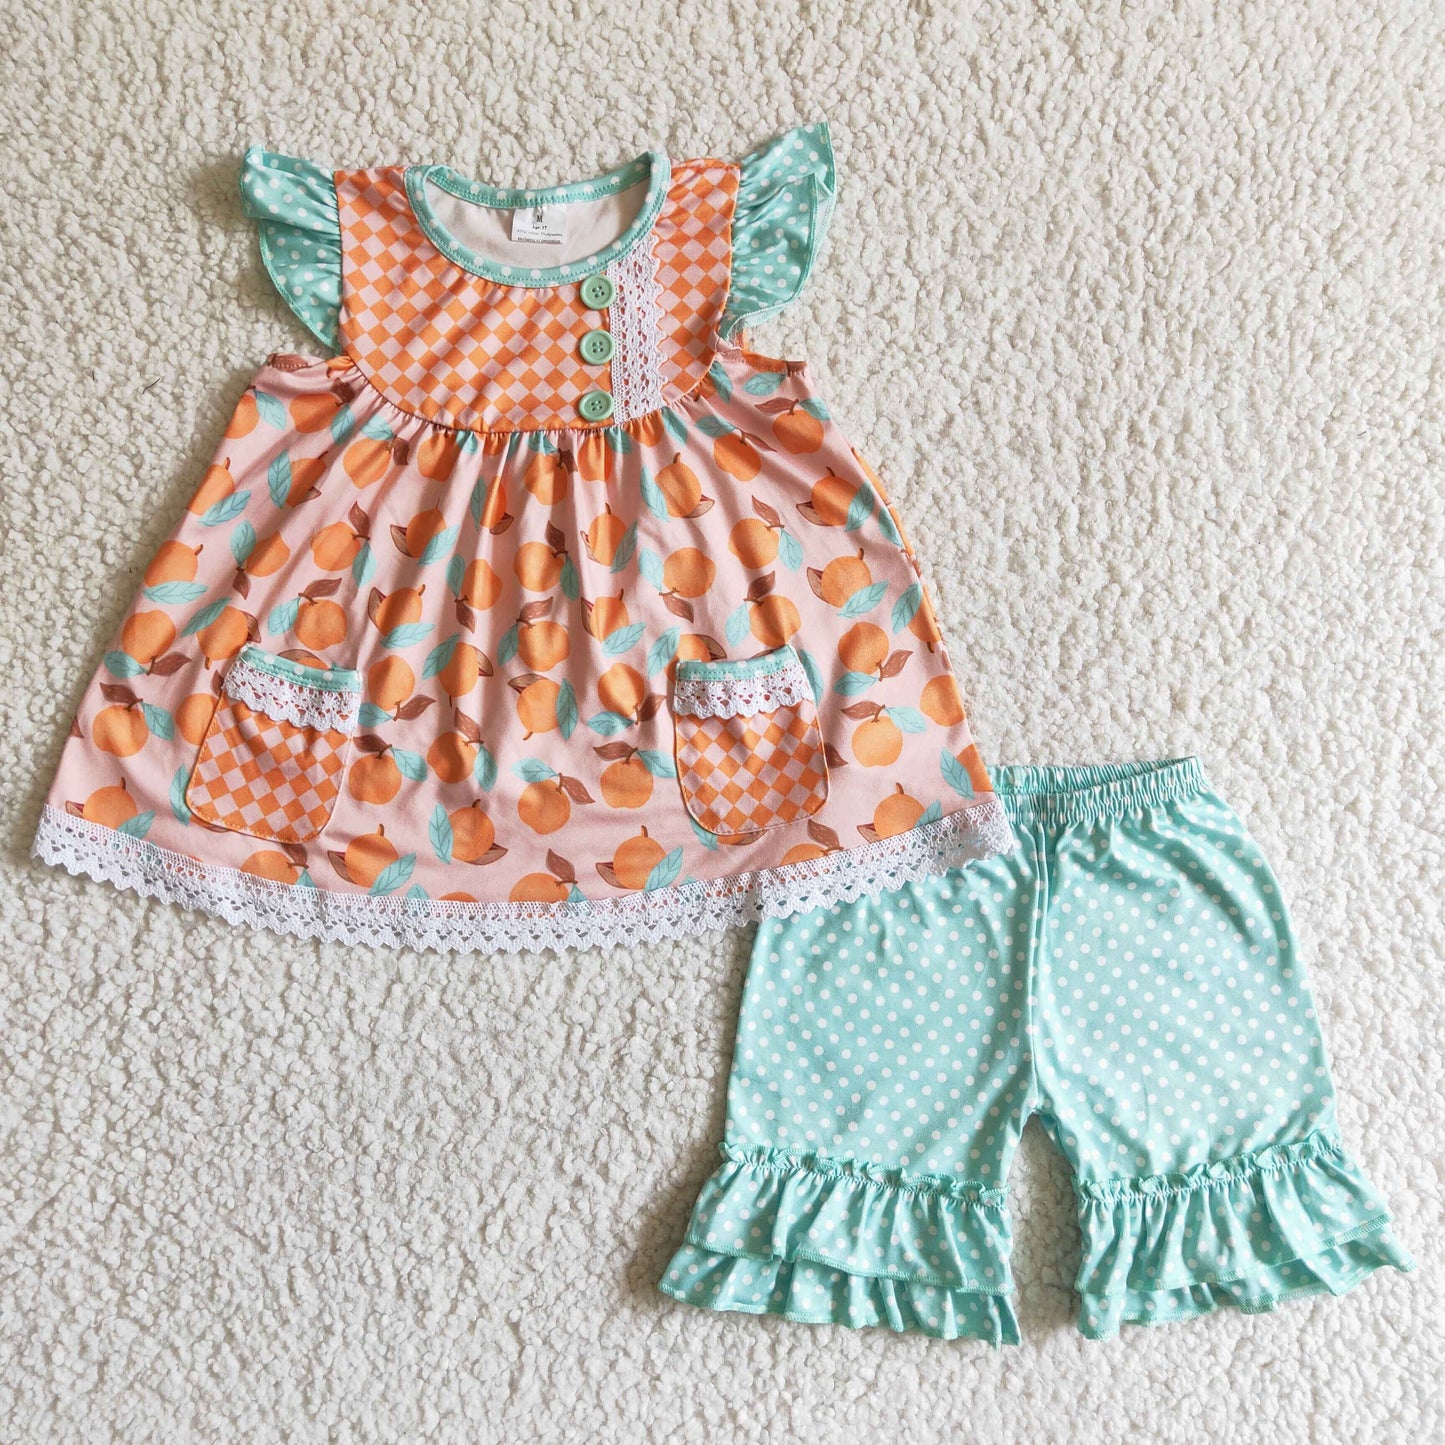 peachy shorts set baby girl’s outfit summer